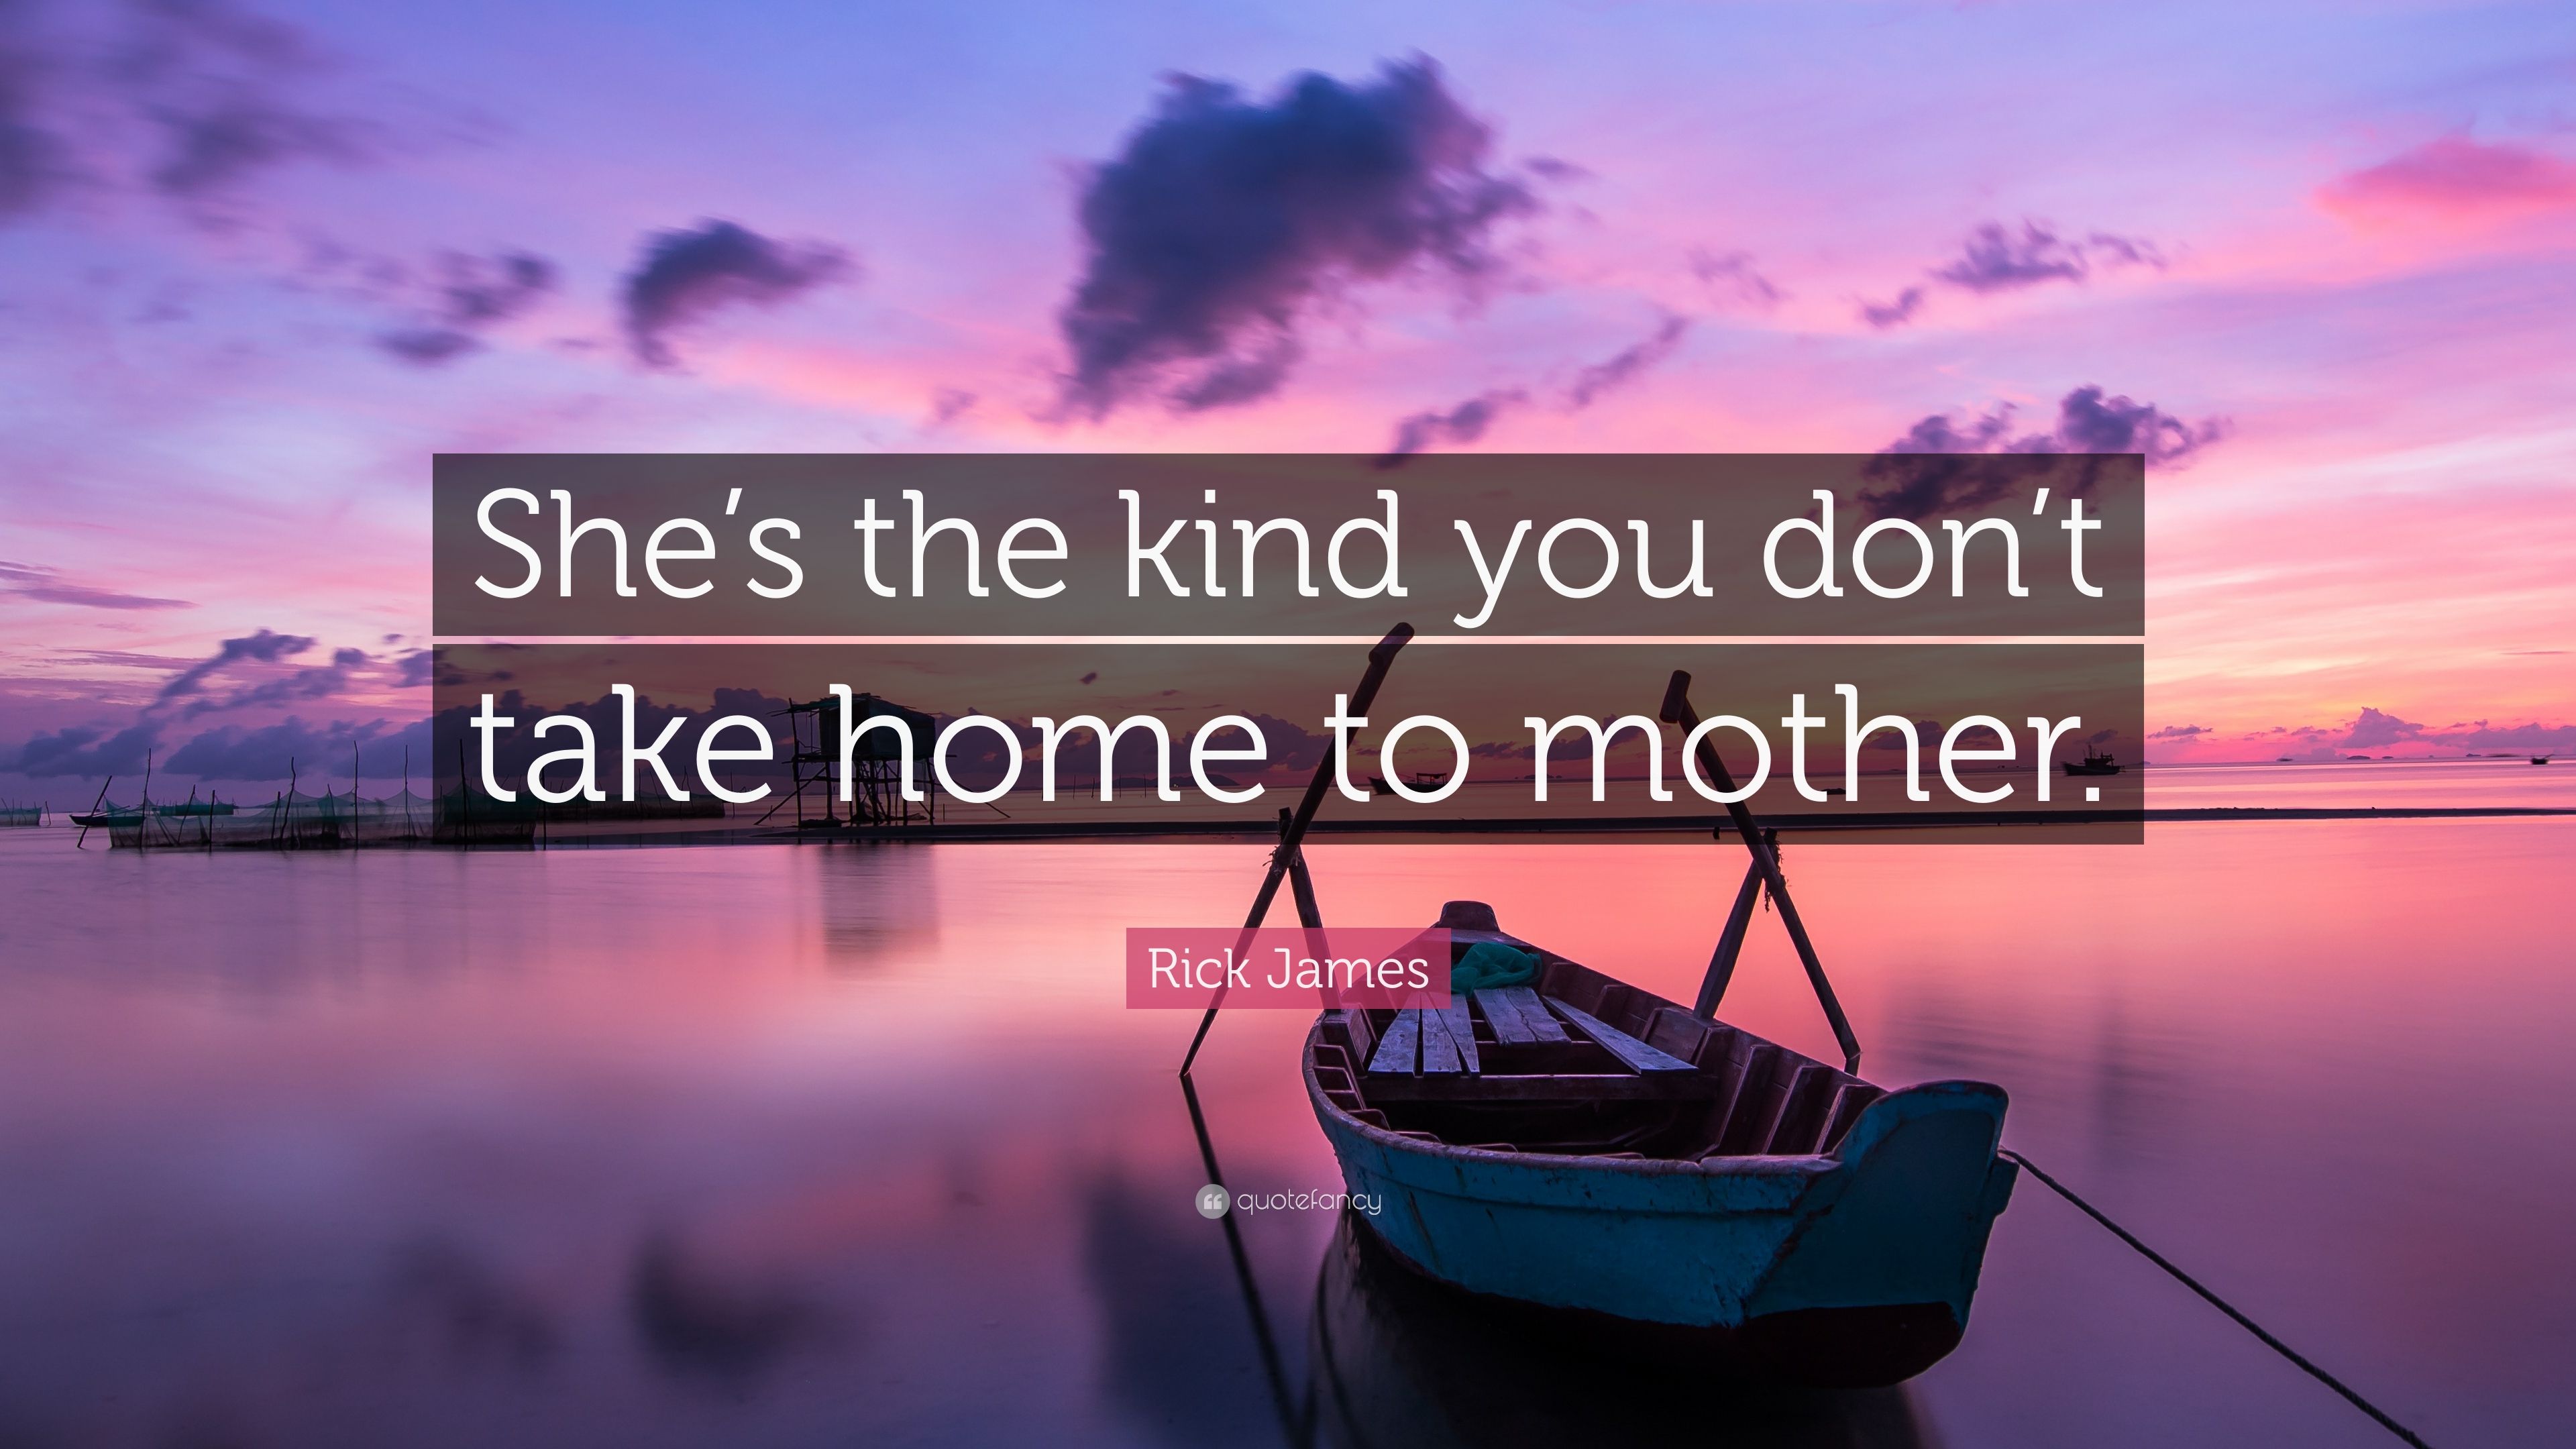 Rick James Quote: “She's the kind you don't take home to mother.”